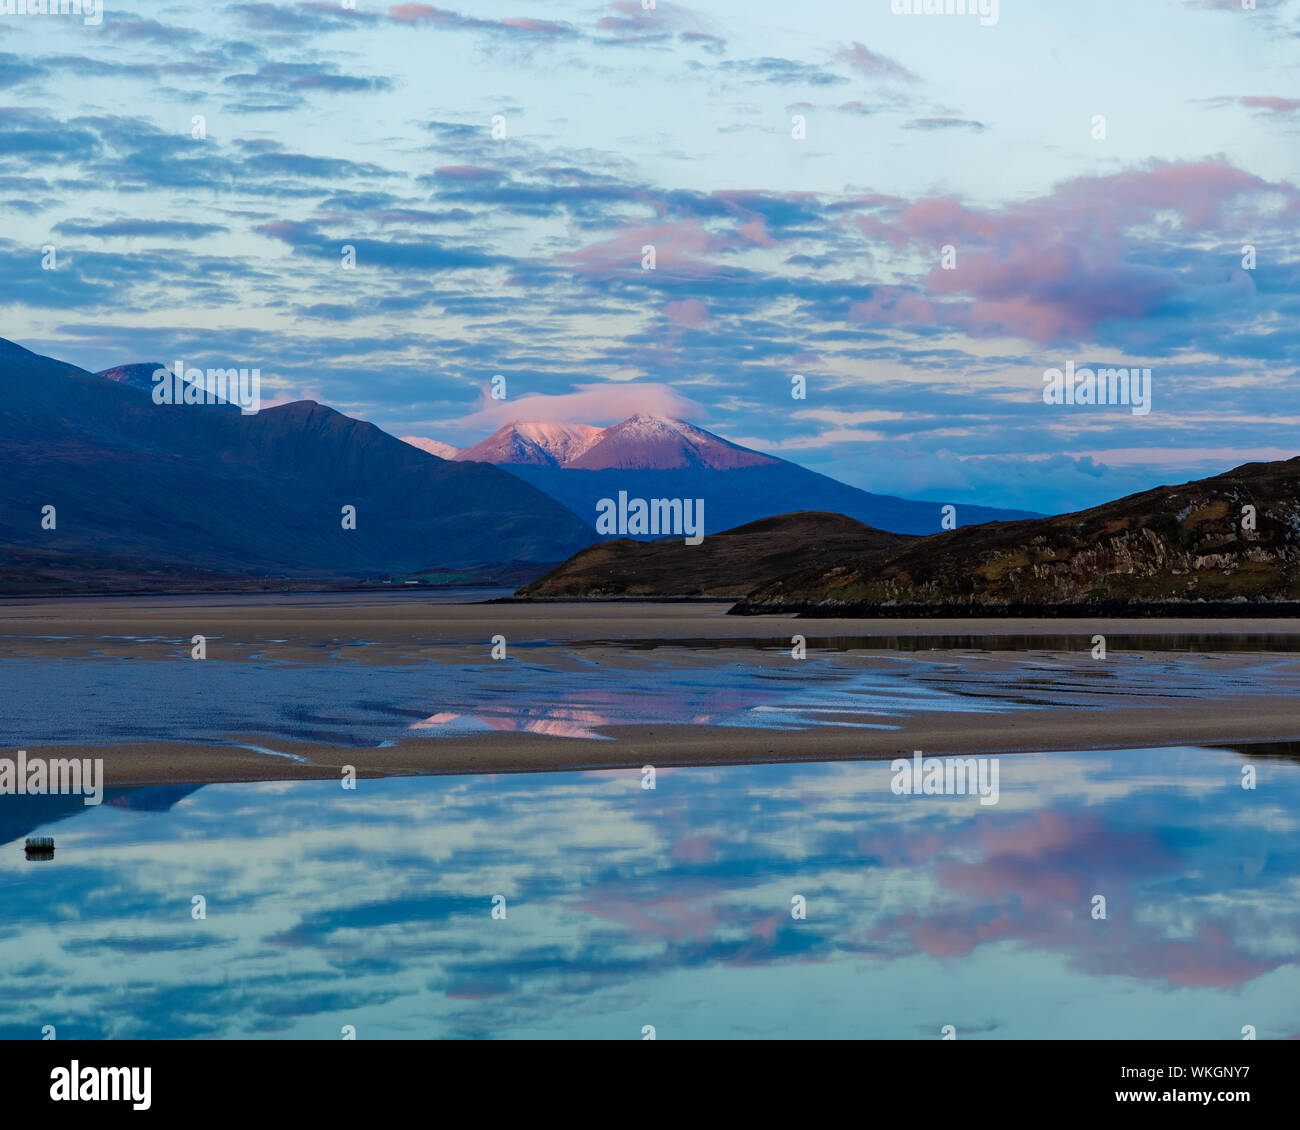 The view from Durness over the Kyle of Durness at sunrise. Beinn Spionnaidh, the snow-capped mountain in the background, lit by the rising sun. In the Stock Photo